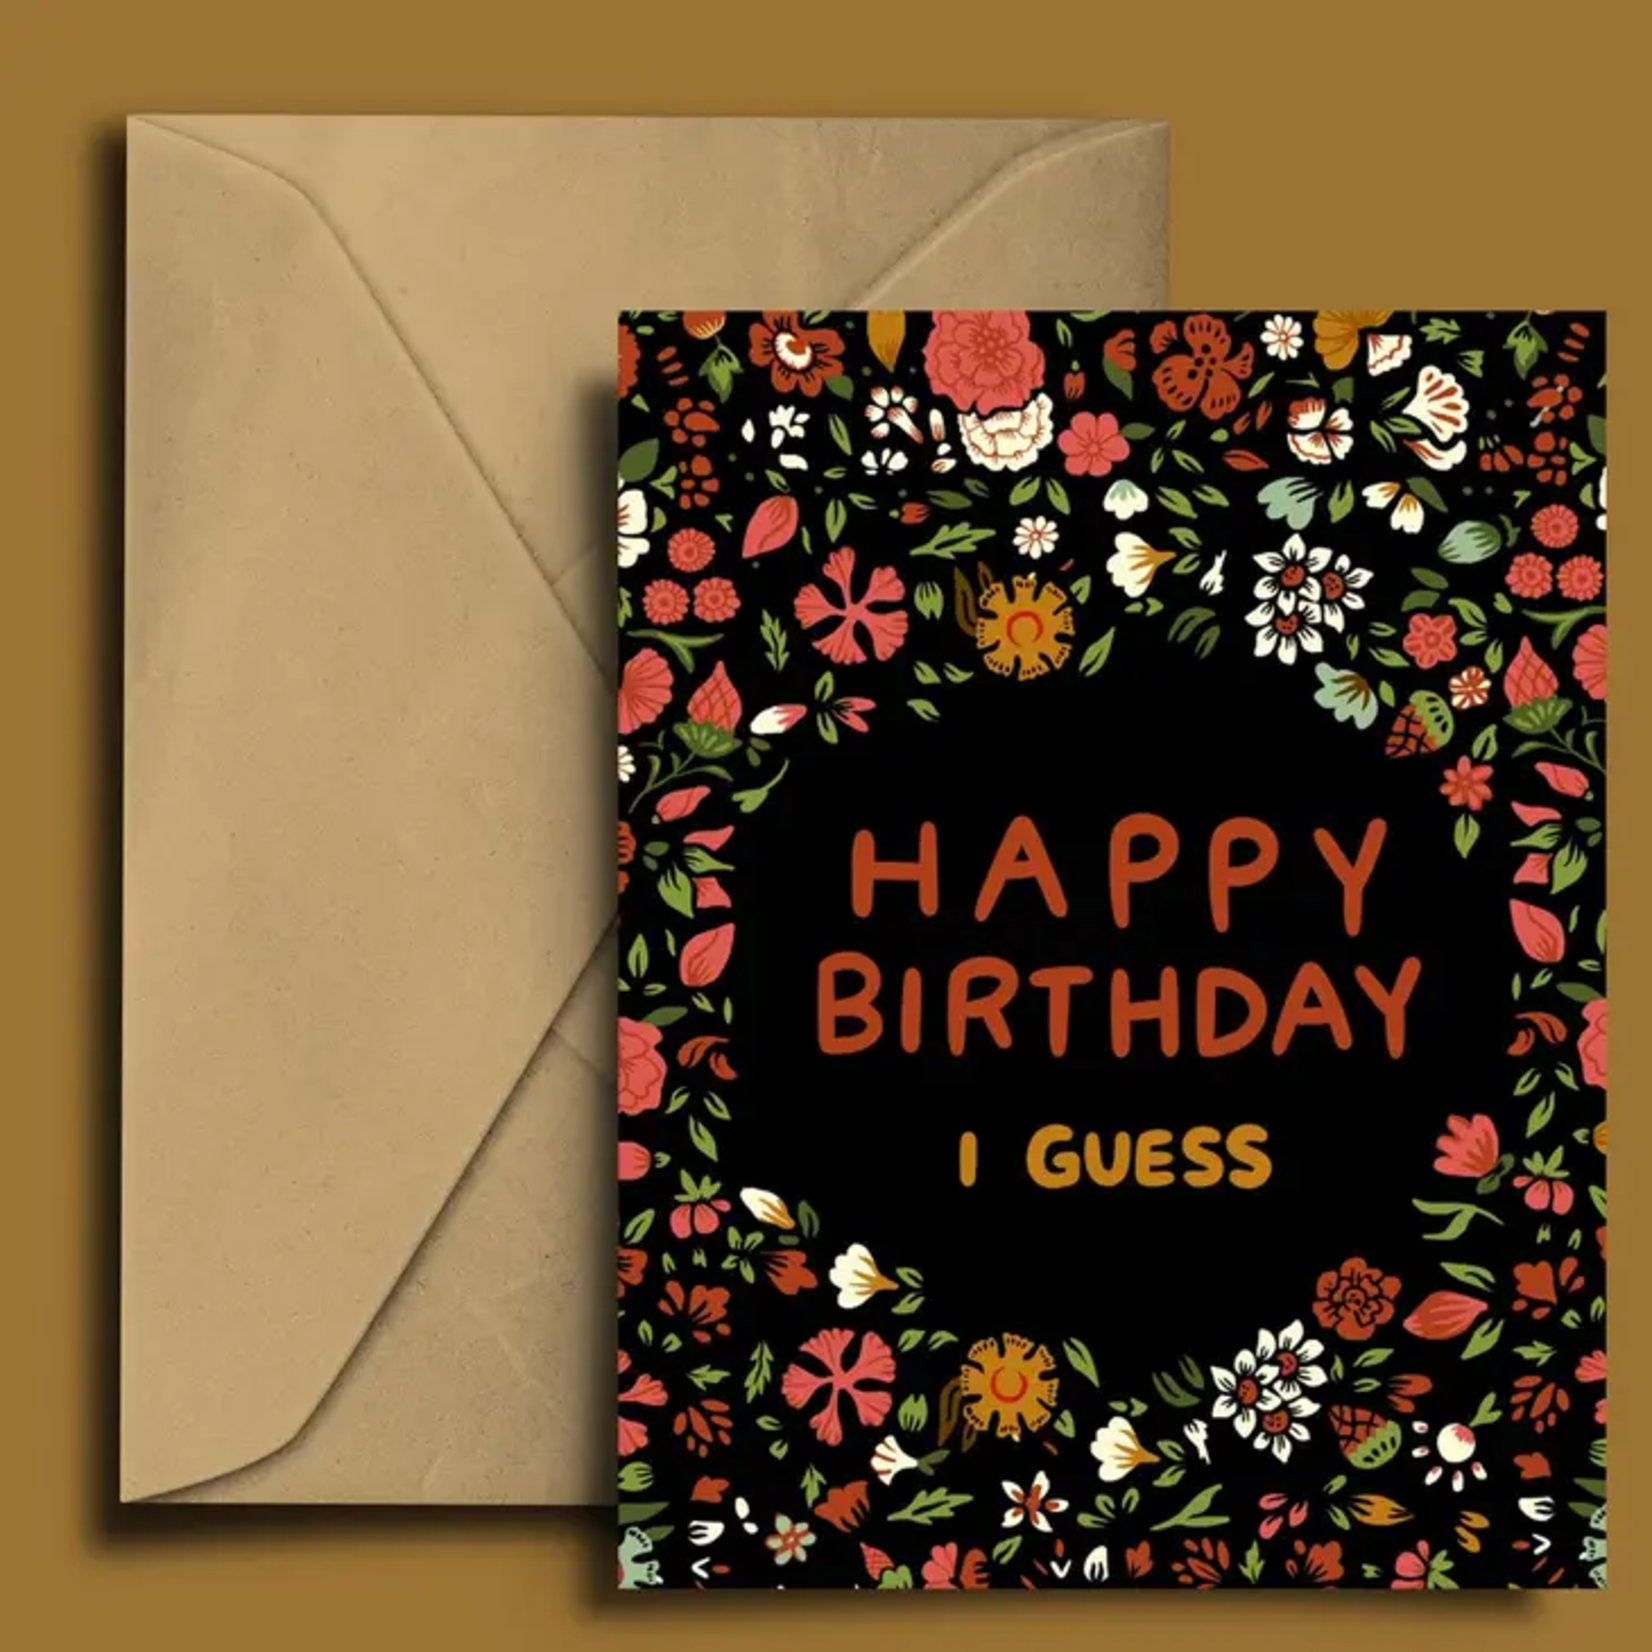 Stay Home Club Happy Birthday I Guess Greeting Card